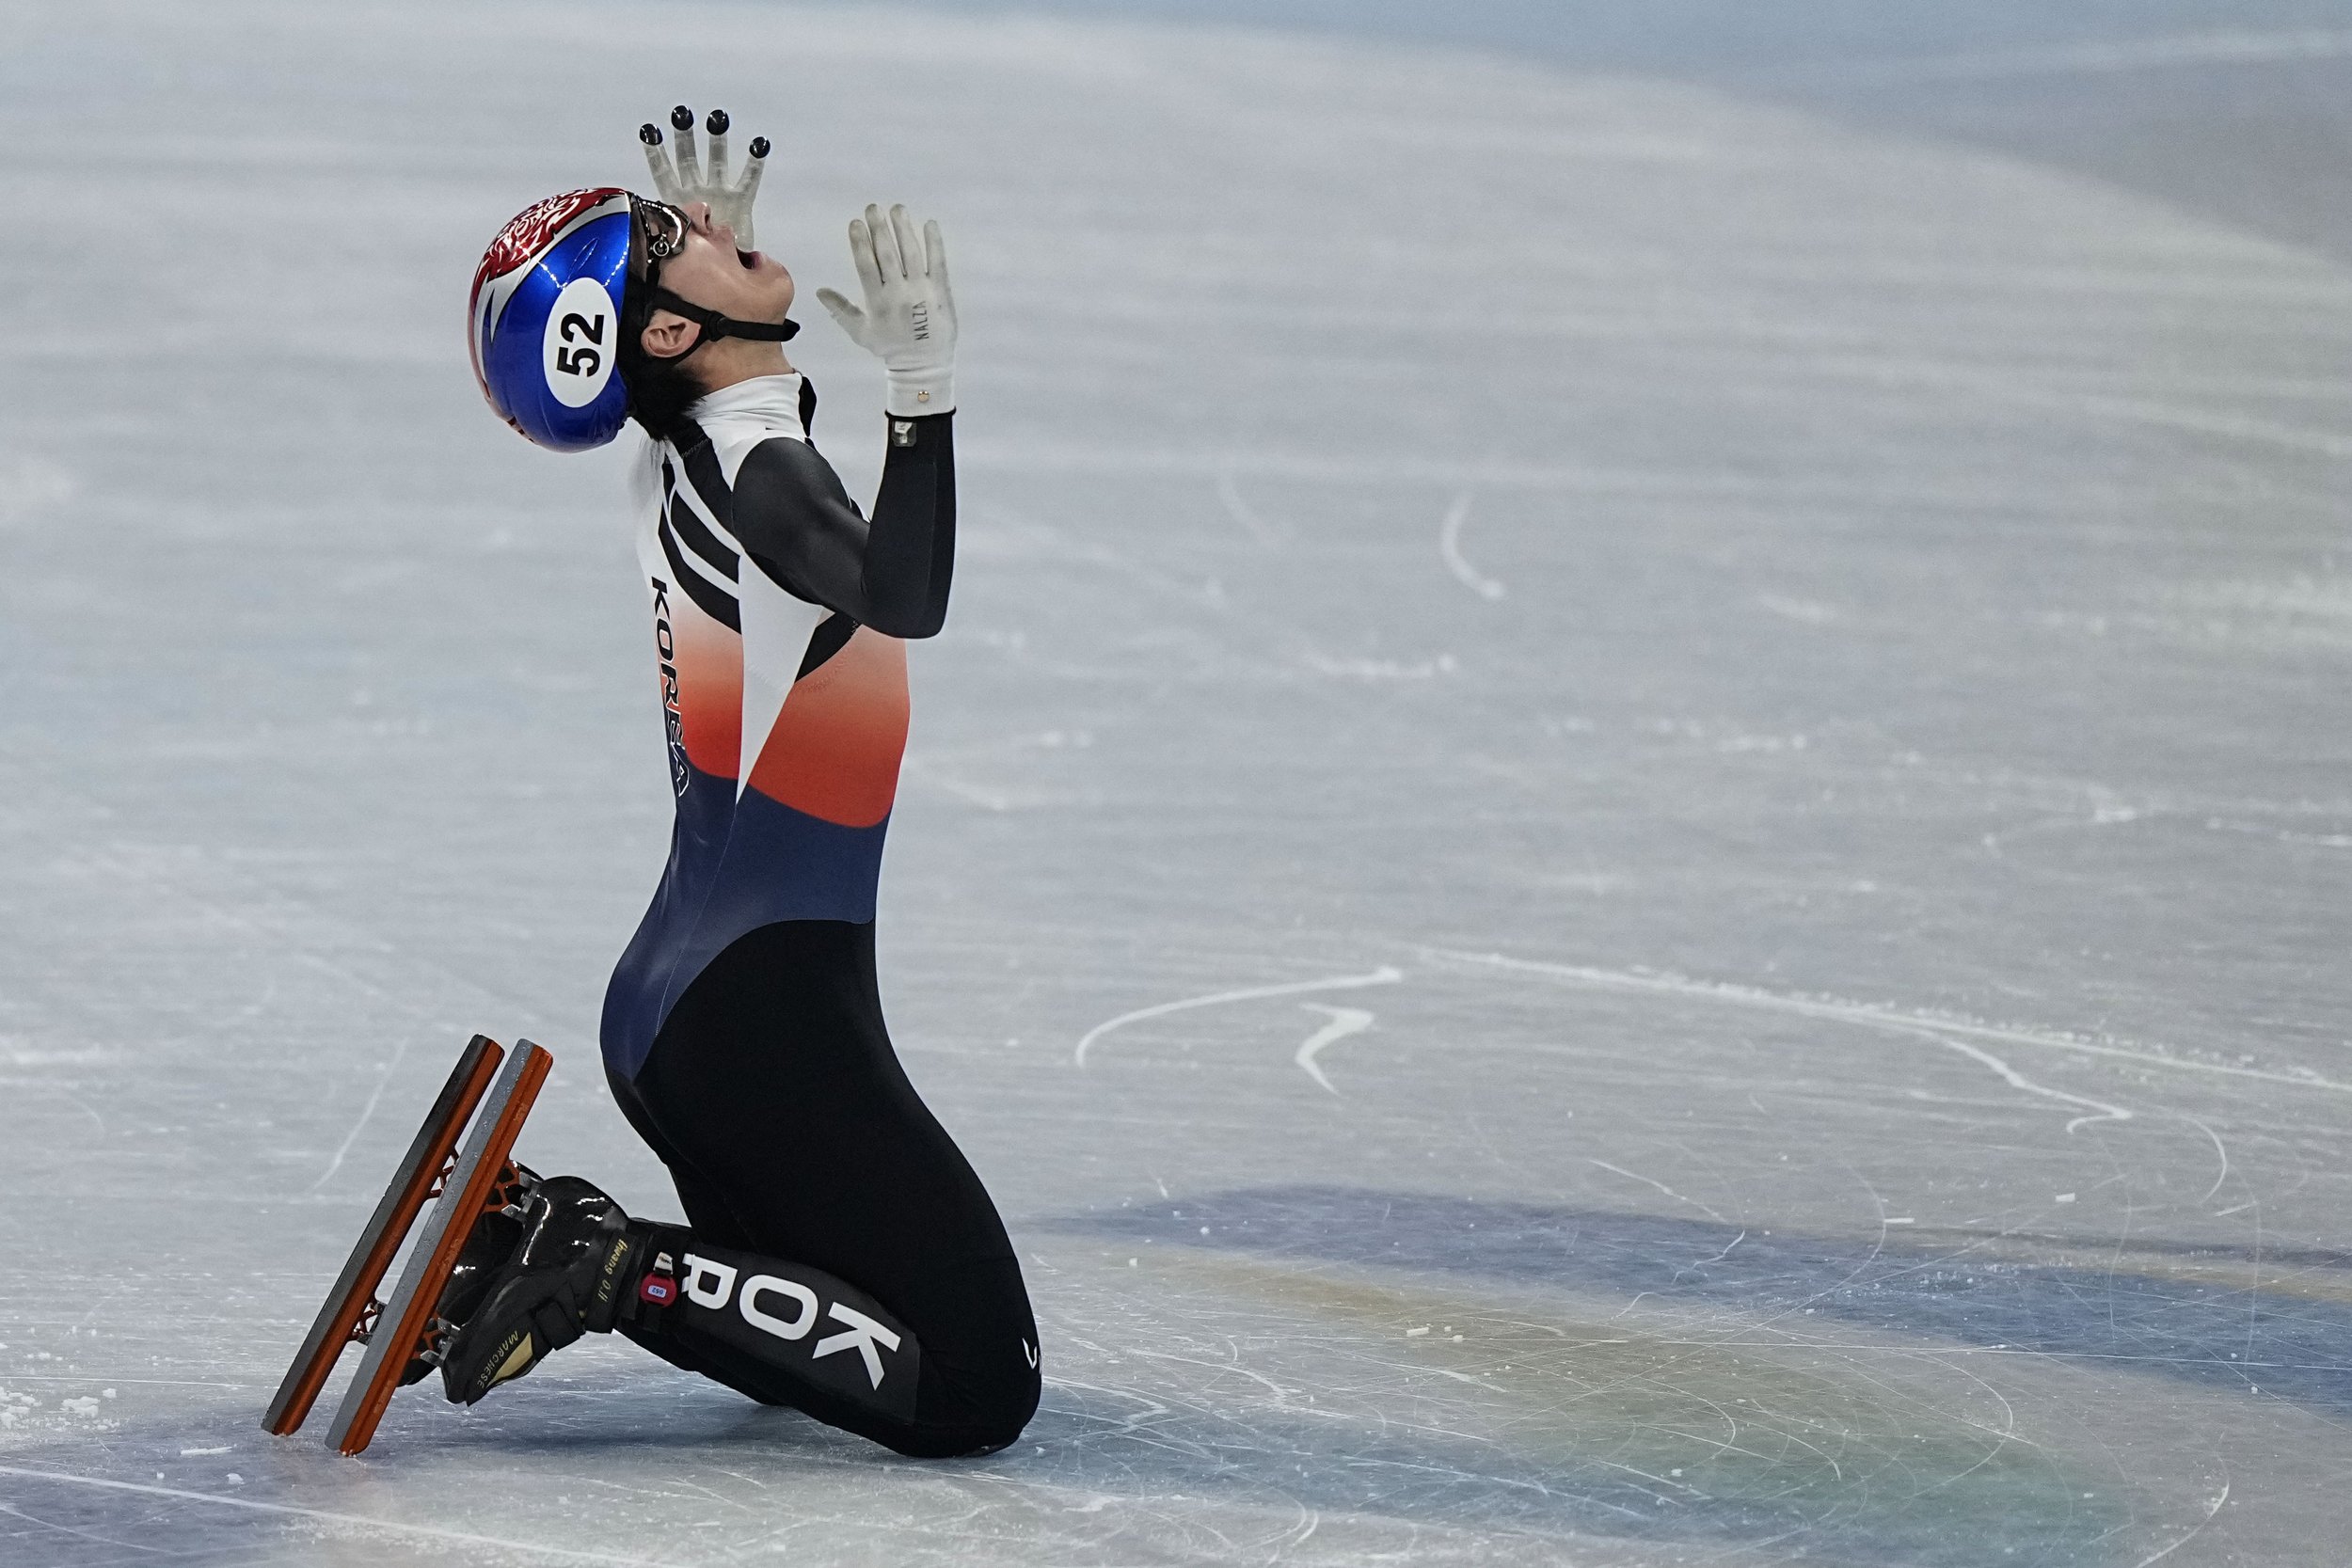  Hwang Dae-heon of South Korea, reacts after winning his men's 1500-meters final during the short track speedskating competition at the 2022 Winter Olympics, Wednesday, Feb. 9, 2022, in Beijing. (AP Photo/David J. Phillip) 